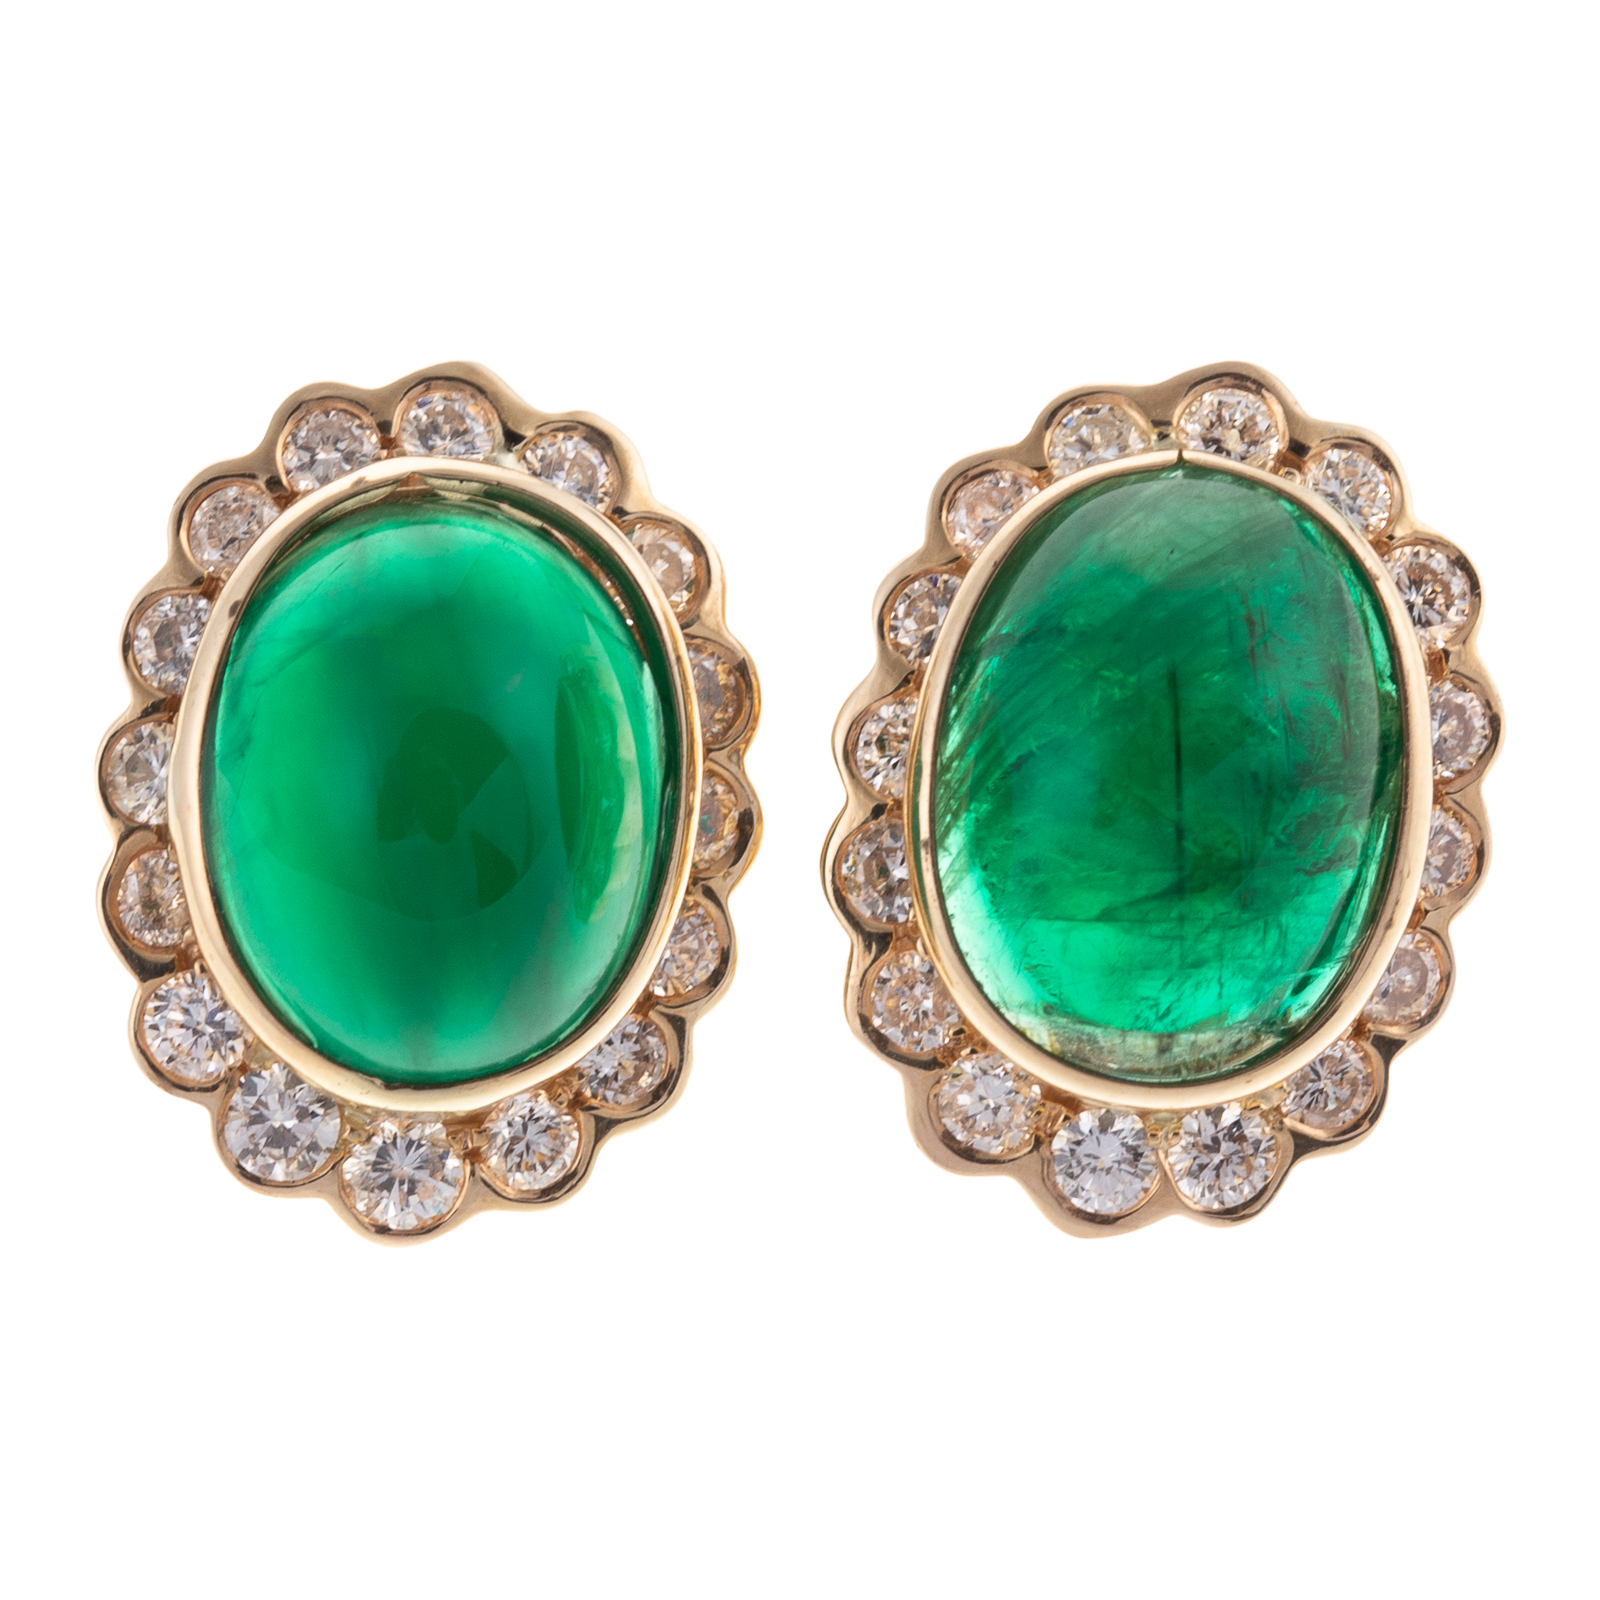 A PAIR OF VERY FINE 14K EMERALD